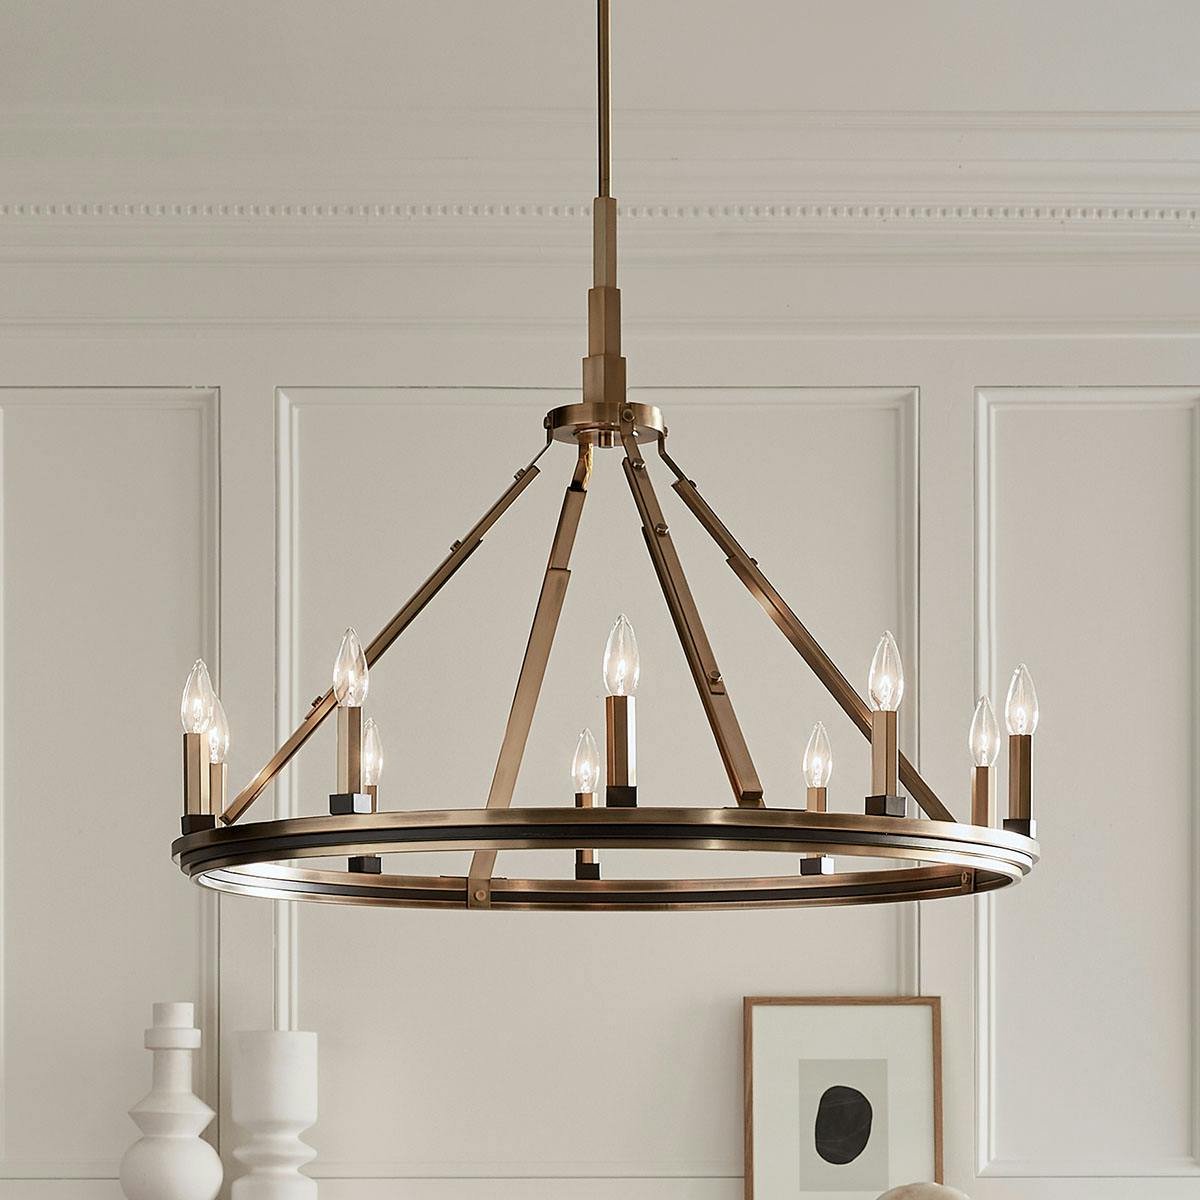 Day time Dining Room image featuring Emmala chandelier 52421BNB